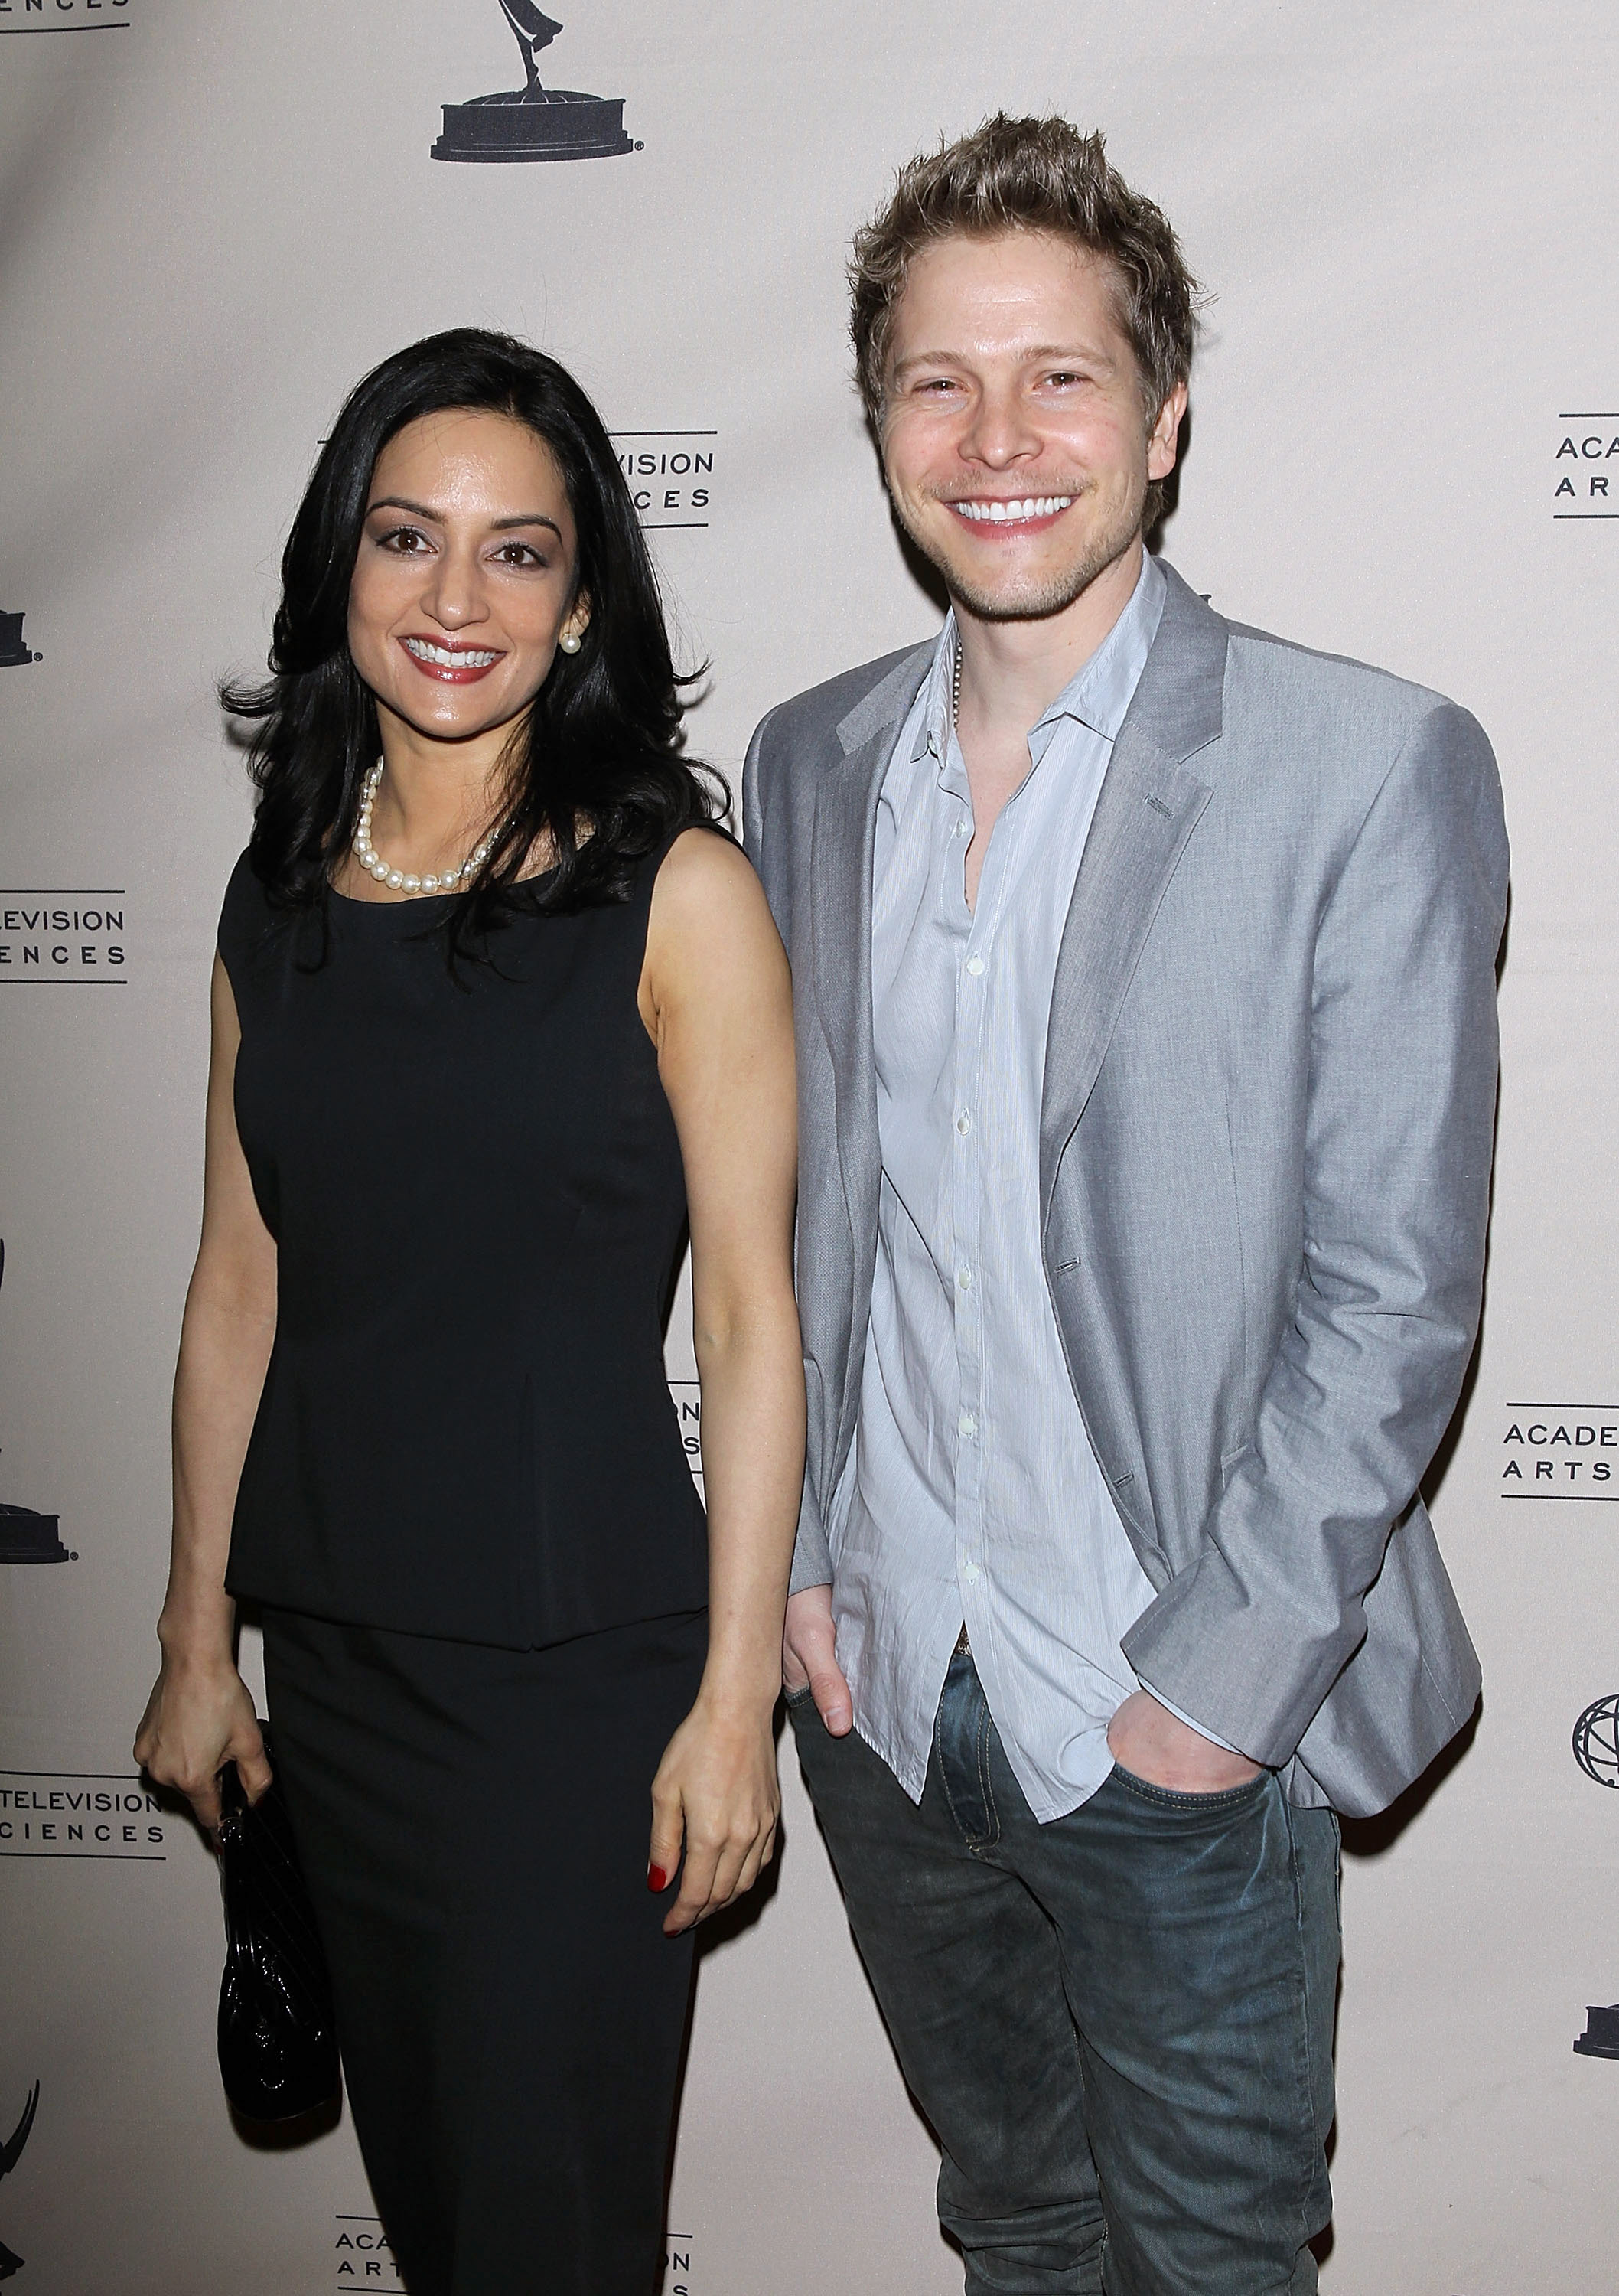 Archie Panjabi and Matt Czuchry pose as they arrive at the Academy Of Television Arts & Sciences Presents An Evening With "The Good Wife" held at Leonard H. Goldenson Theatre on January 31, 2011, in North Hollywood, California | Source: Getty Images